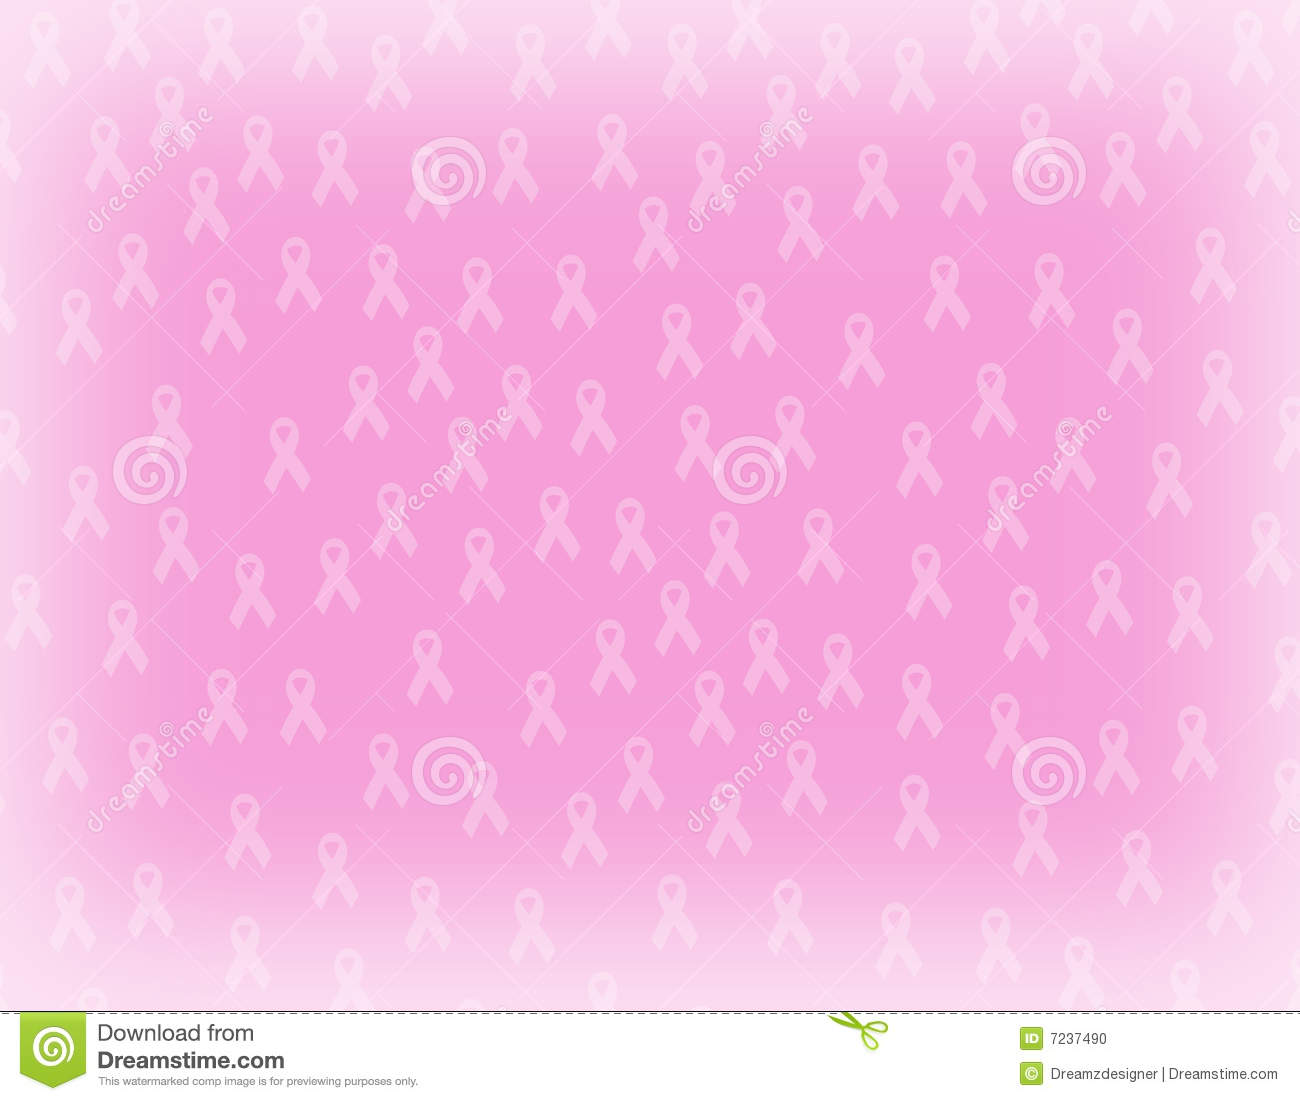 Breast Cancer Awareness Ribbons Background Frame Cute Pink